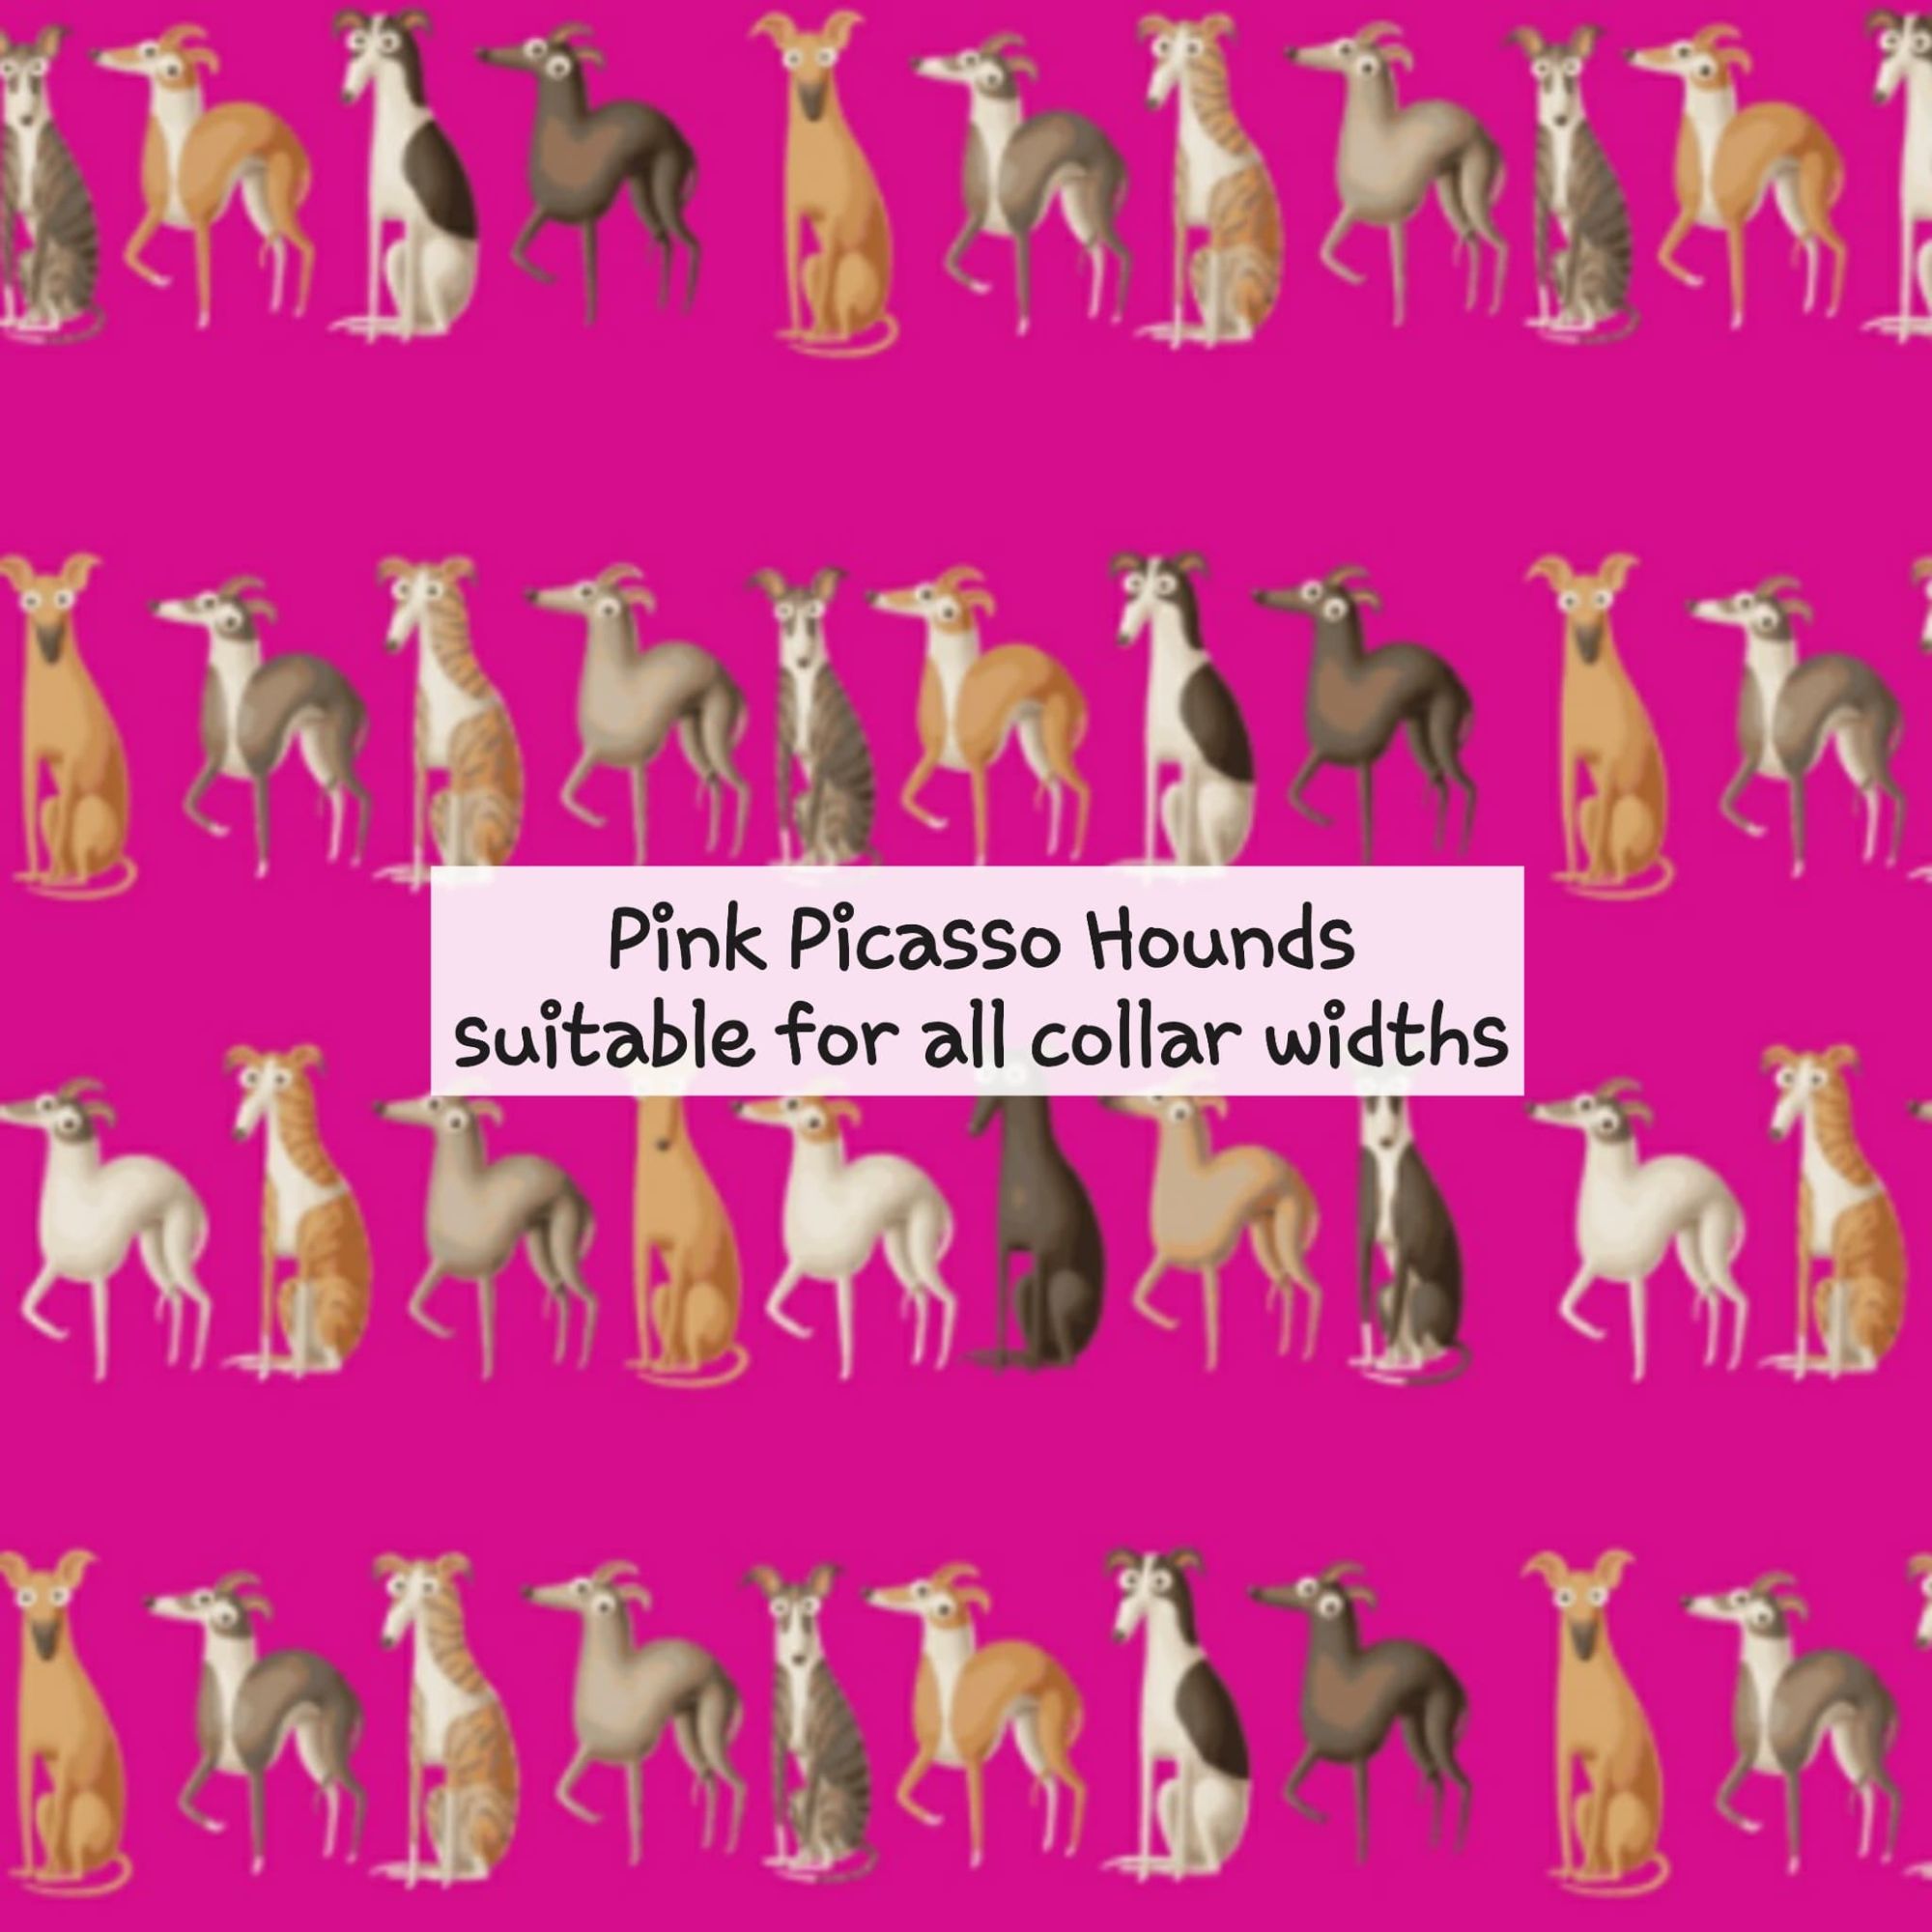 Pink Picasso Hounds